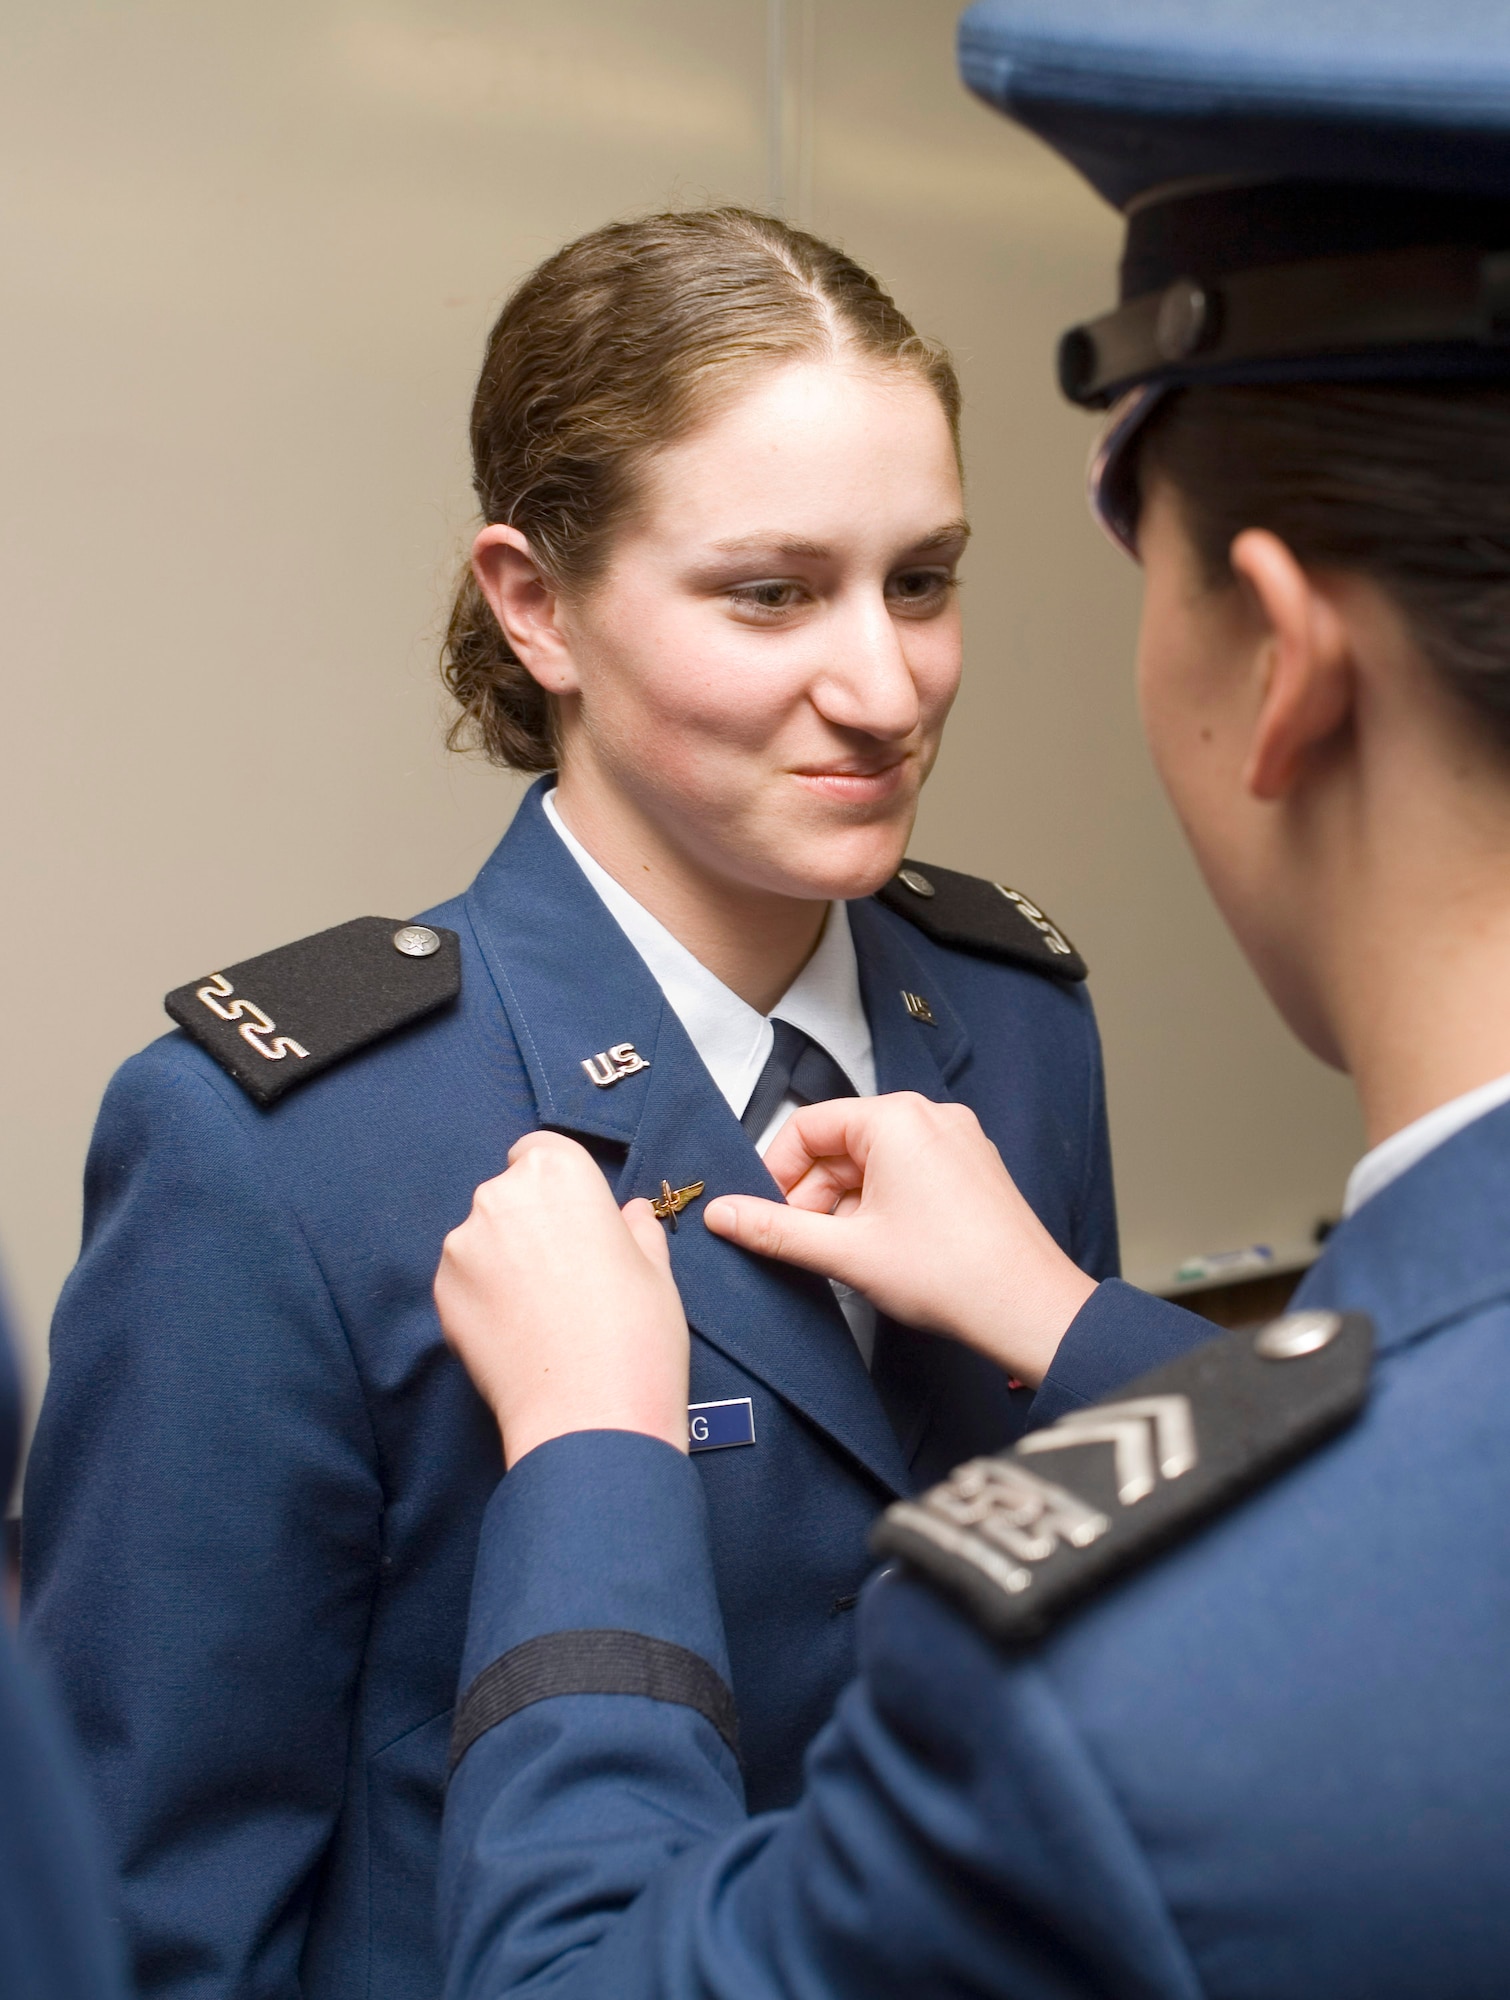 Cadet 4th Class Roberta Nitzberg of Cadet Squadron 8 receives her much-anticipated prop and wings during a formal ceremony Saturday, March 18, 2006, at the U.S. Air Force Academy, Colo. (U.S. Air Force photo/Eddie Kovsky) 

